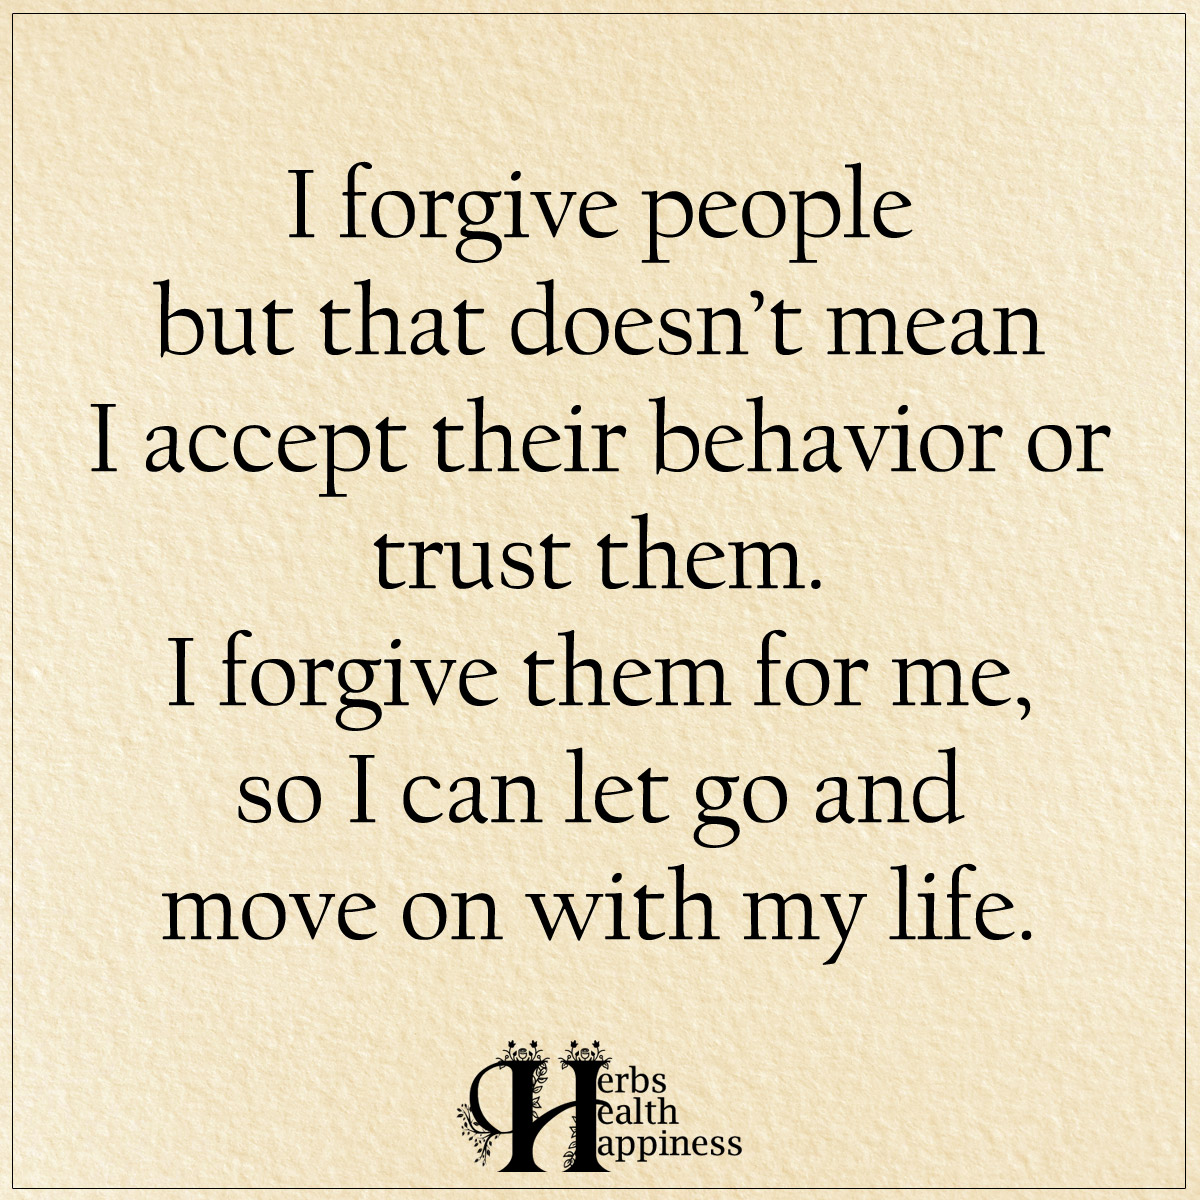 I Forgive People But That Doesn't Mean I Accept Their Behavior